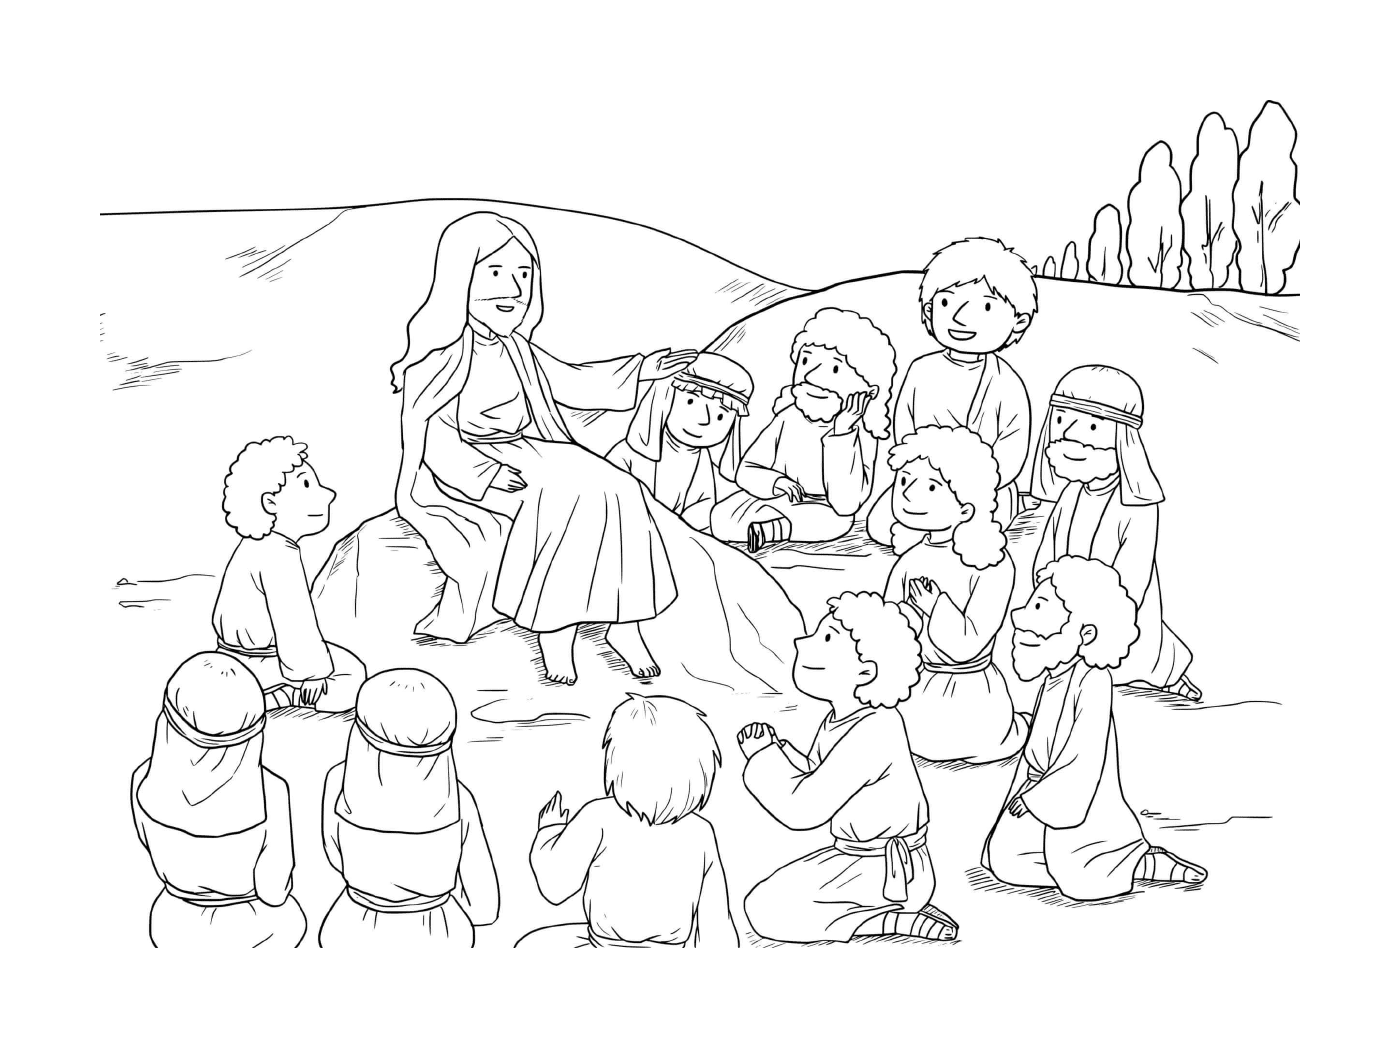  Group of people gathered around a woman 